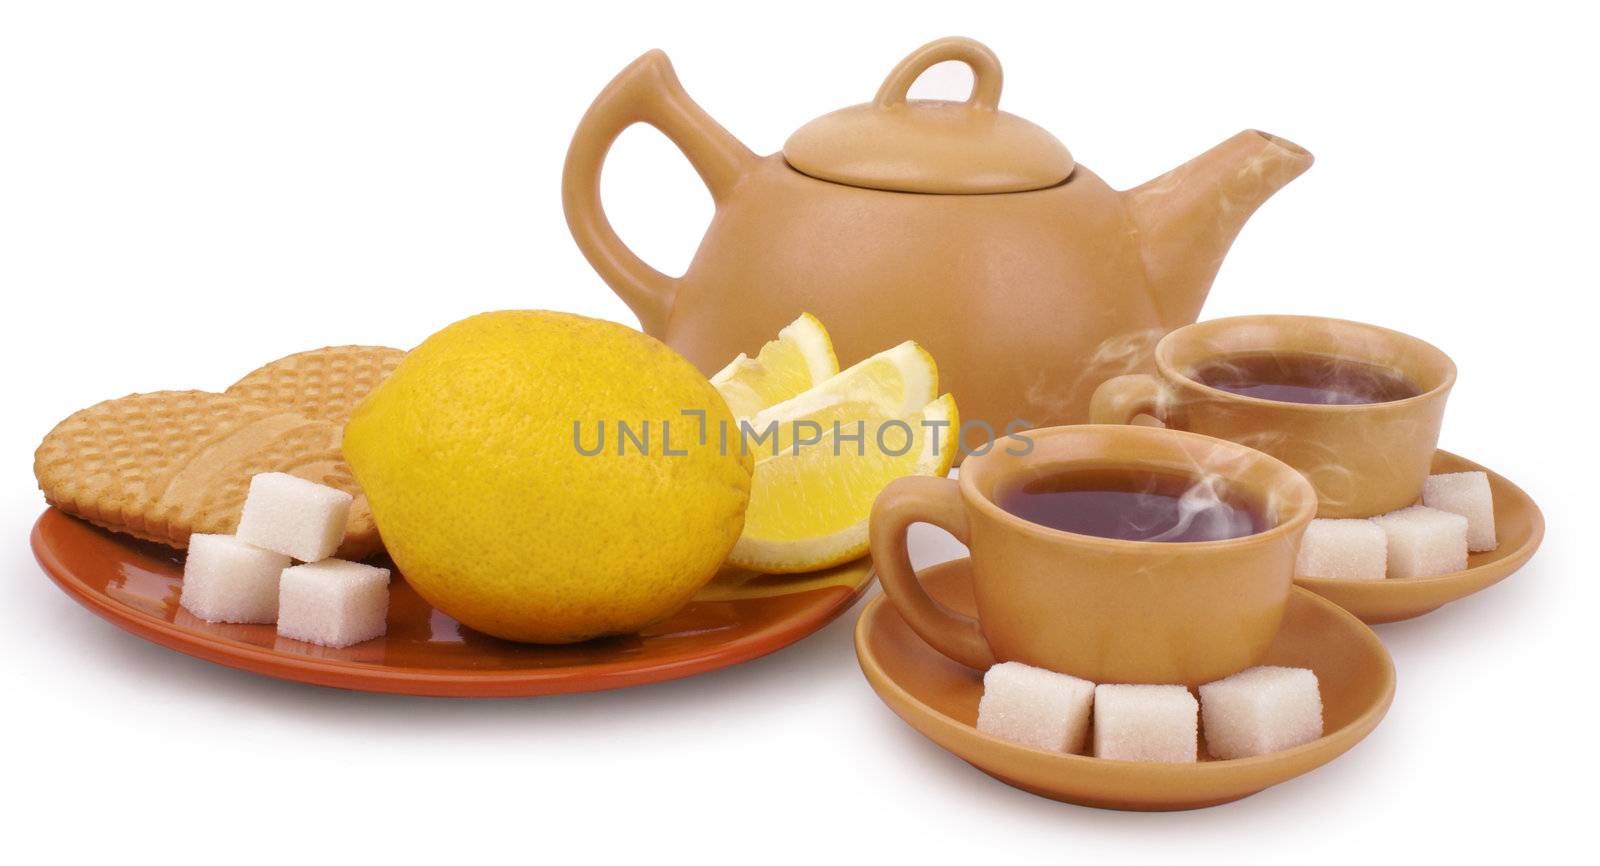 set of the earthenware teapot, two cups of tea, lump shugar, sliced lemon and biscuits isolated on white background with clipping path                        